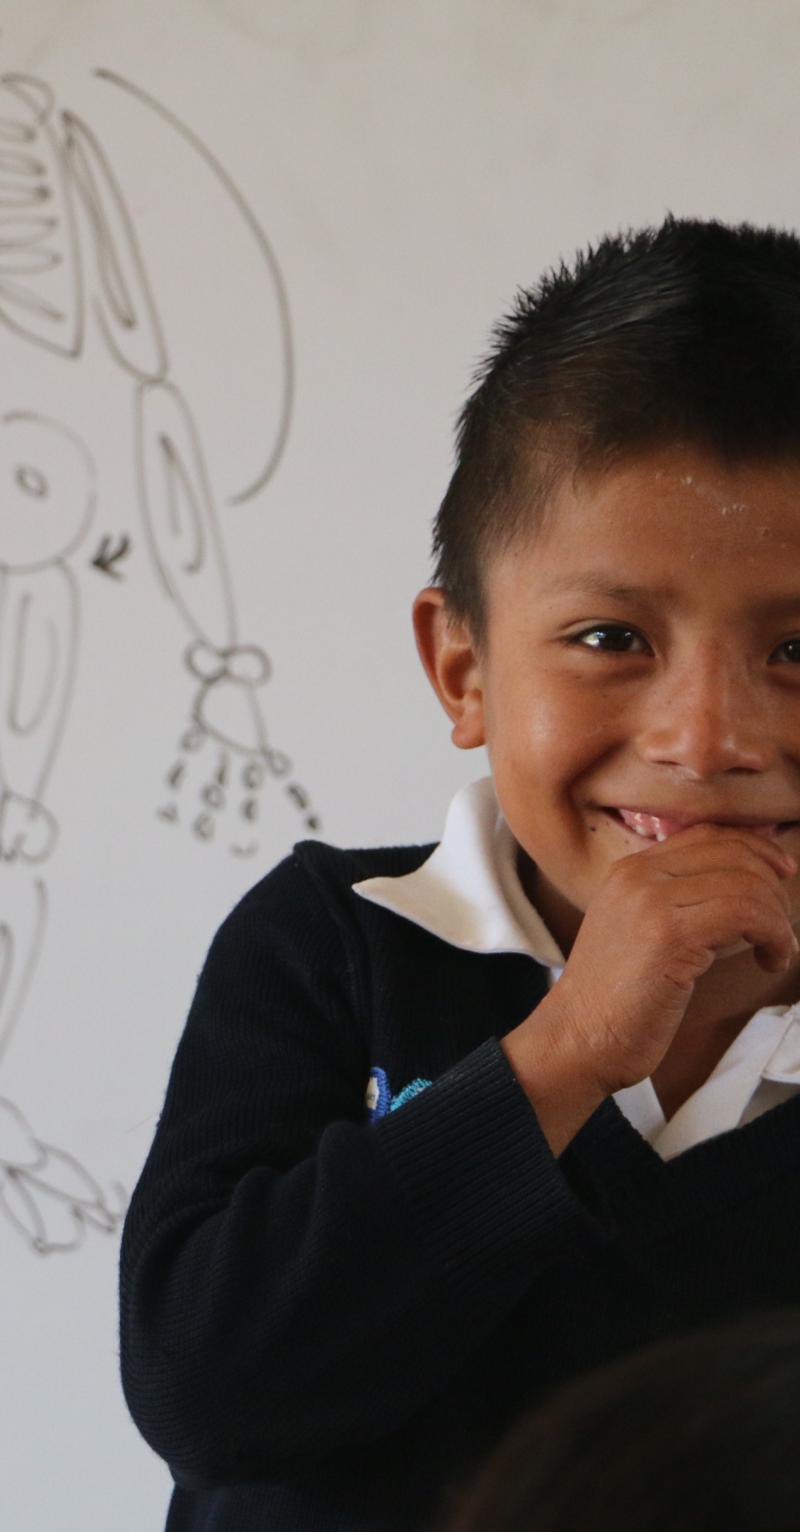 A close up of a young boy smiling broadly in front of a white board with a skeleton drawn on it and a word in Spanish that is partially obsured by the boy's head